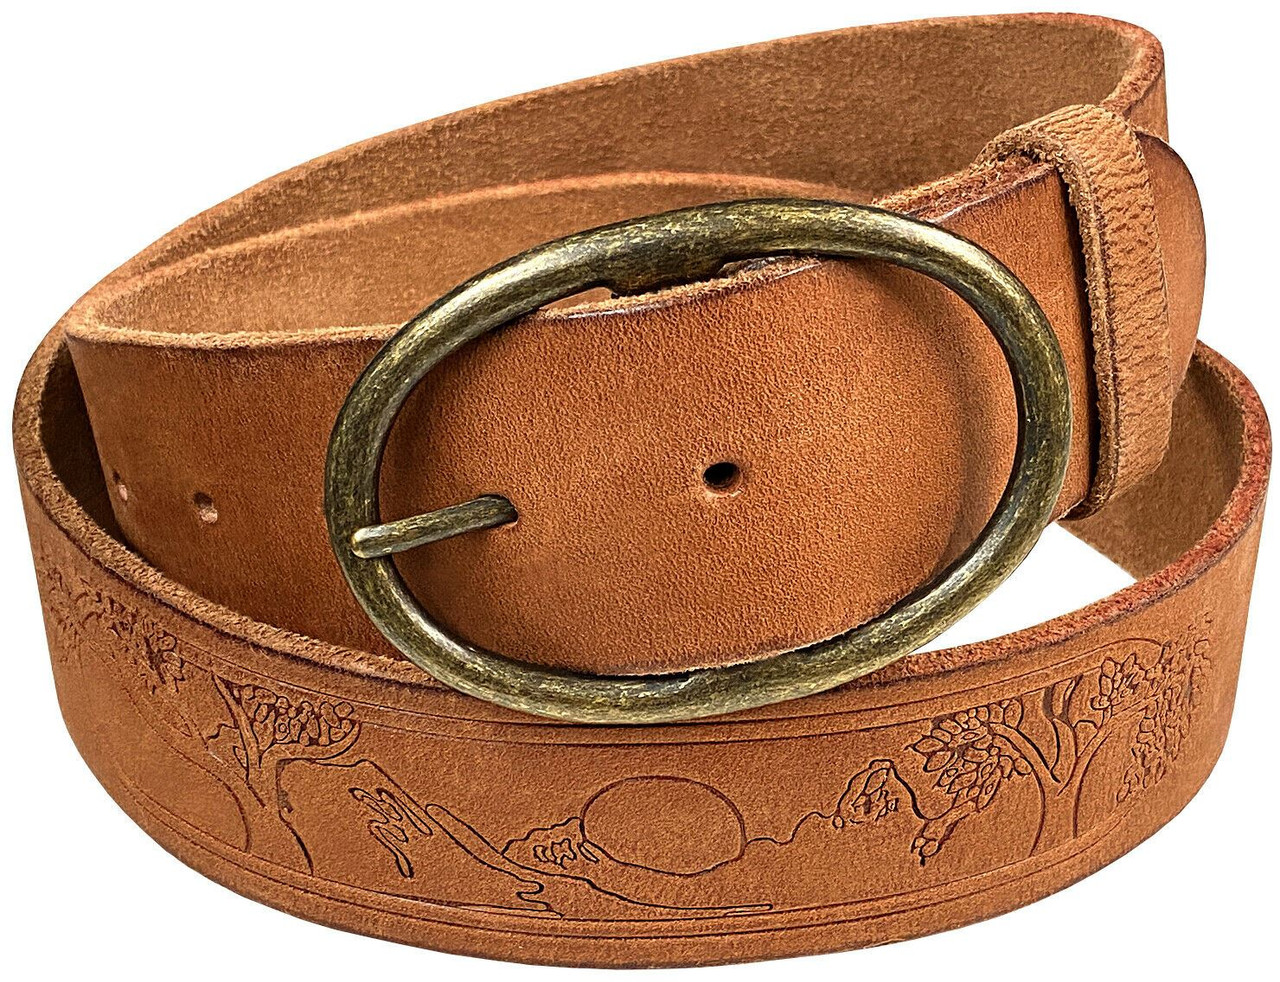 Mens Belt Genuine Leather Width 3 8cm Thickness 4 0cm Good With